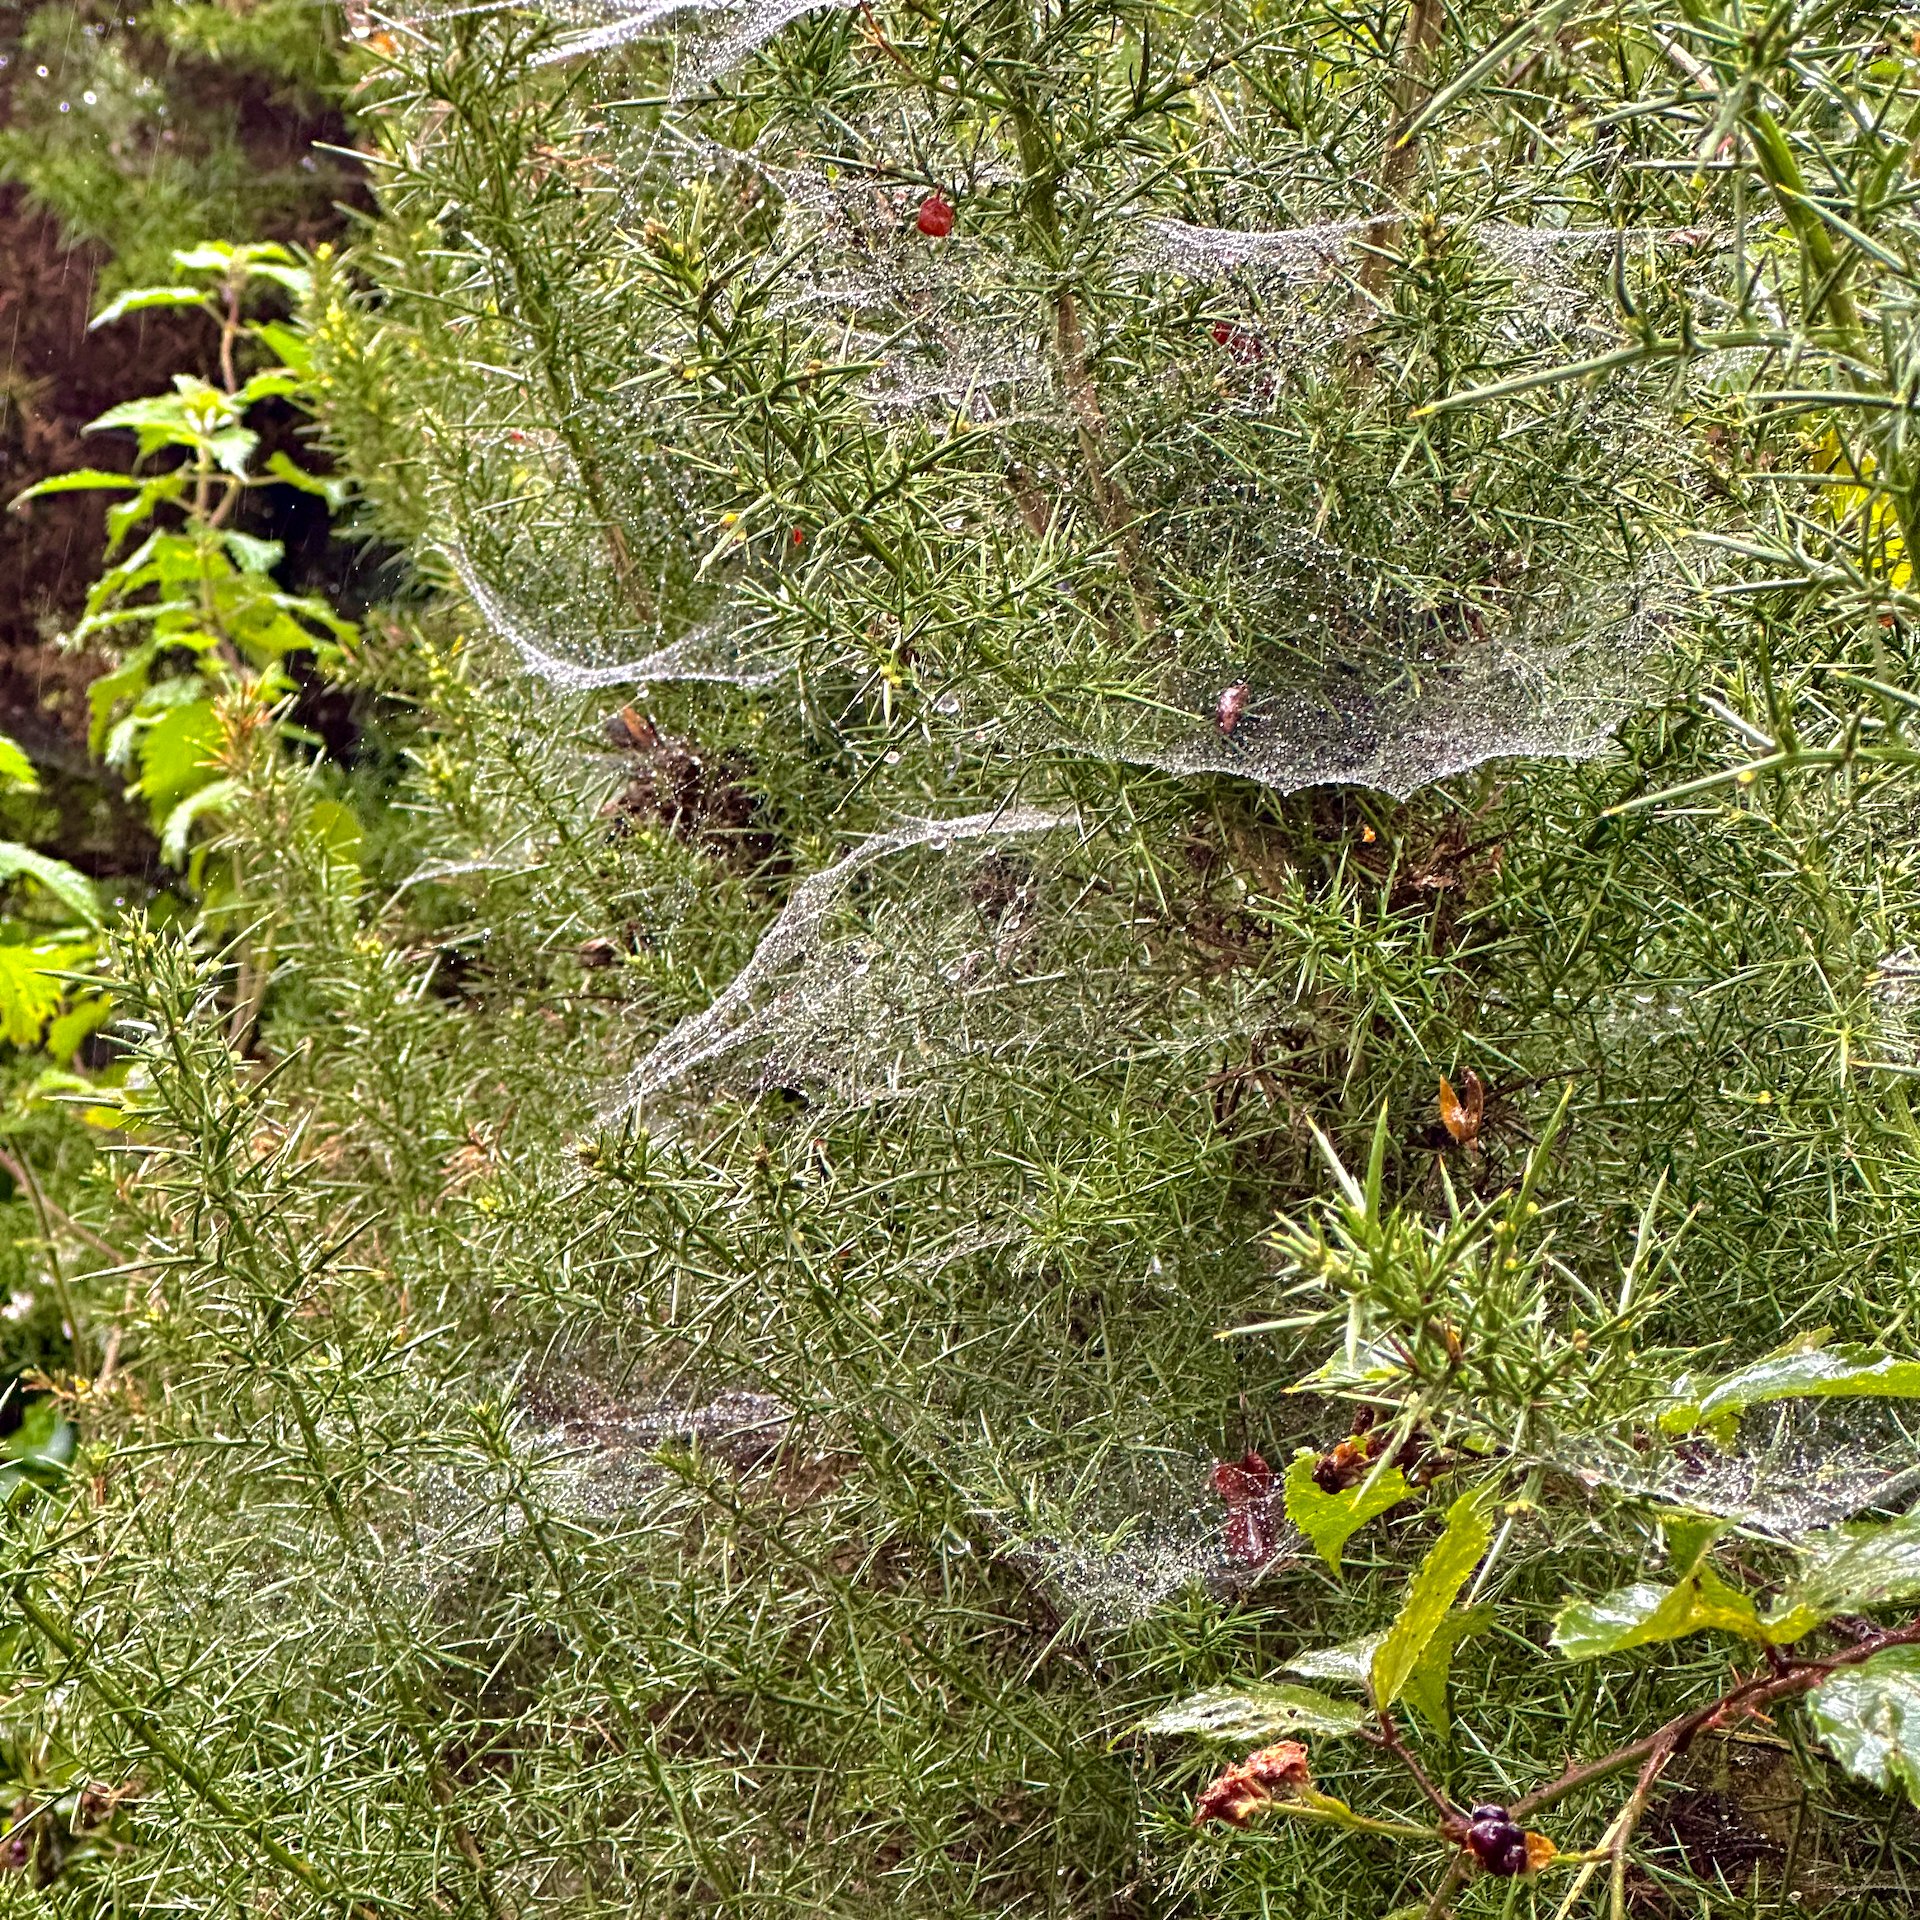  We thought these were spider webs, but it turned out to be some other type of caterpillar.  